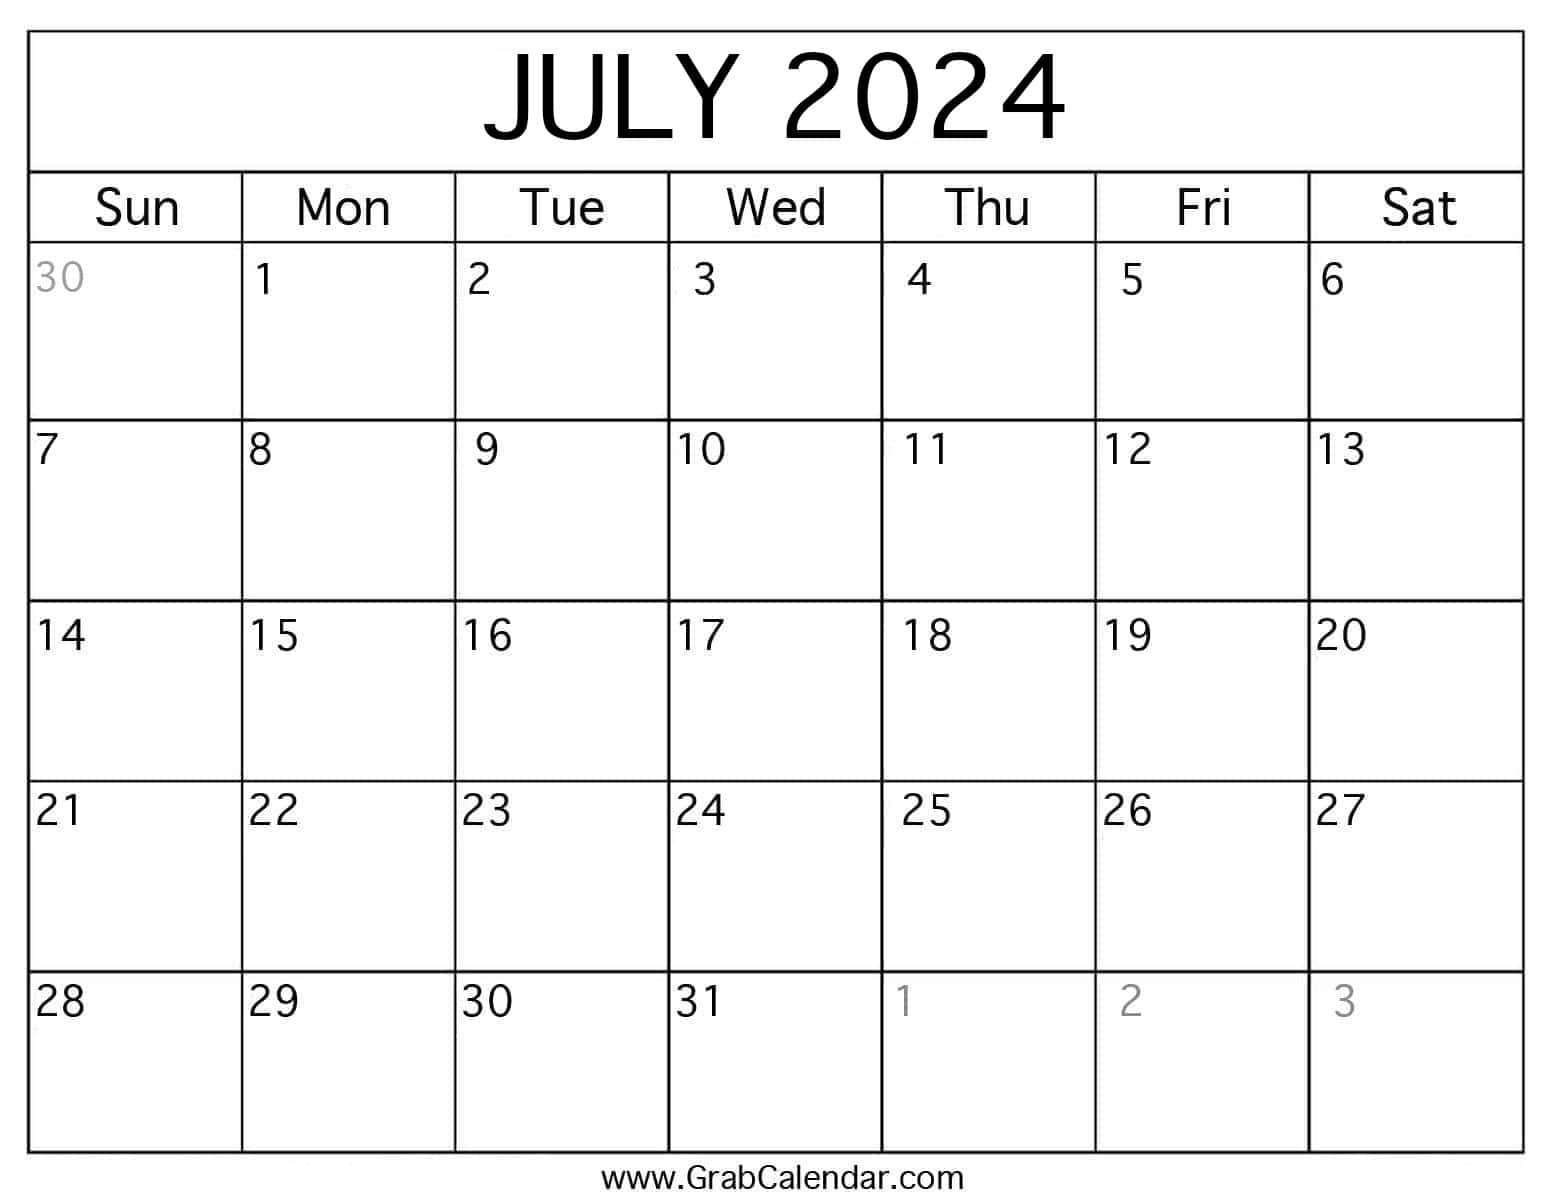 Printable July 2024 Calendar | A Calendar For The Month Of July 2024